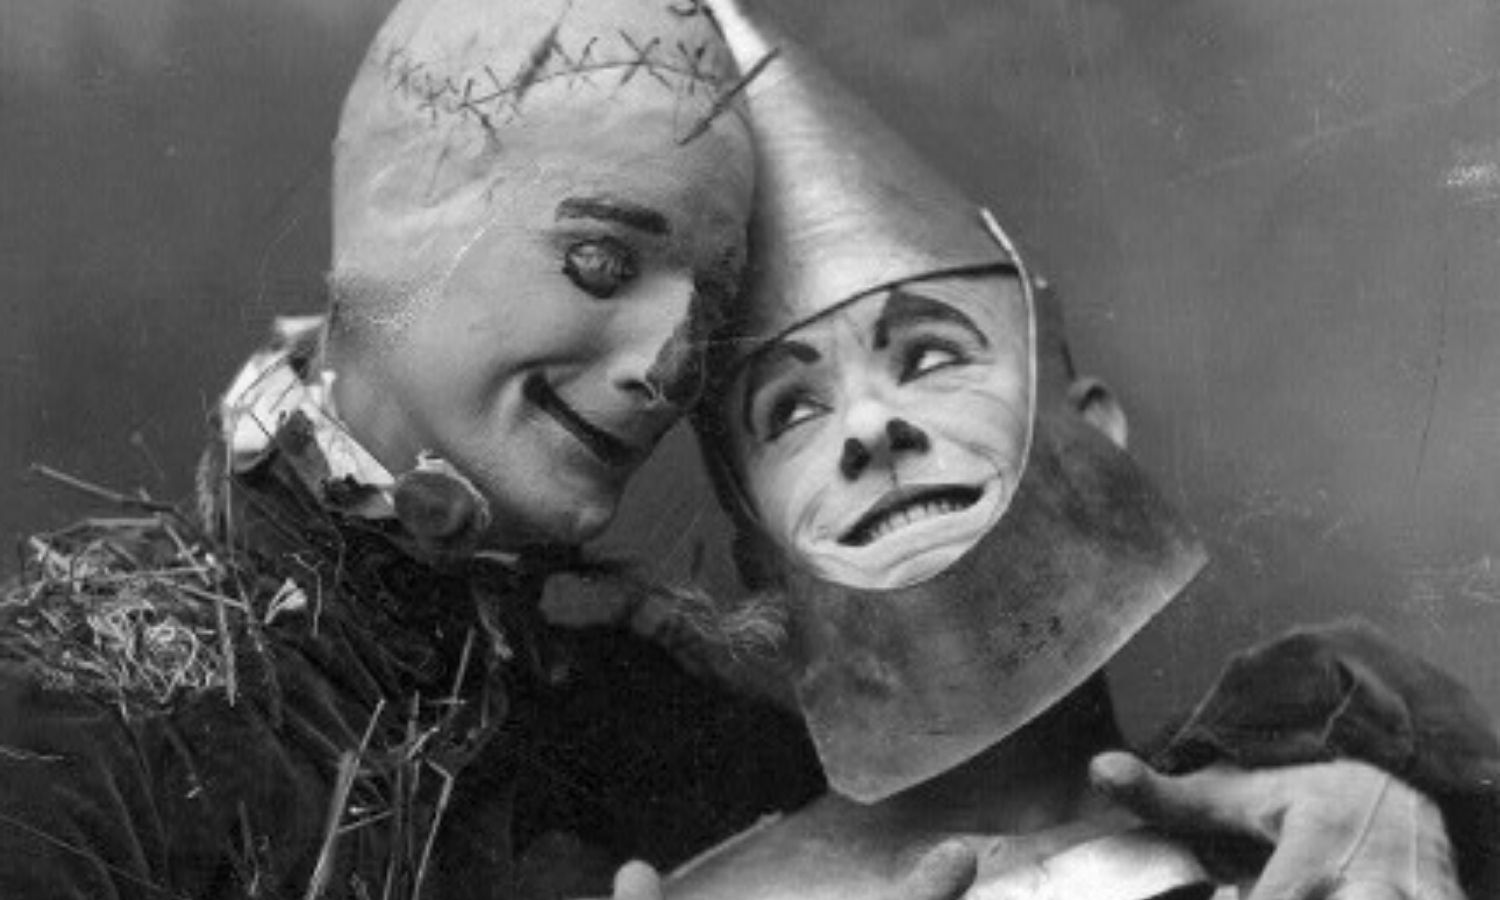 OTD in 1902: The Wizard of Oz was shown at The Chicago Grand Opera House for the first time.